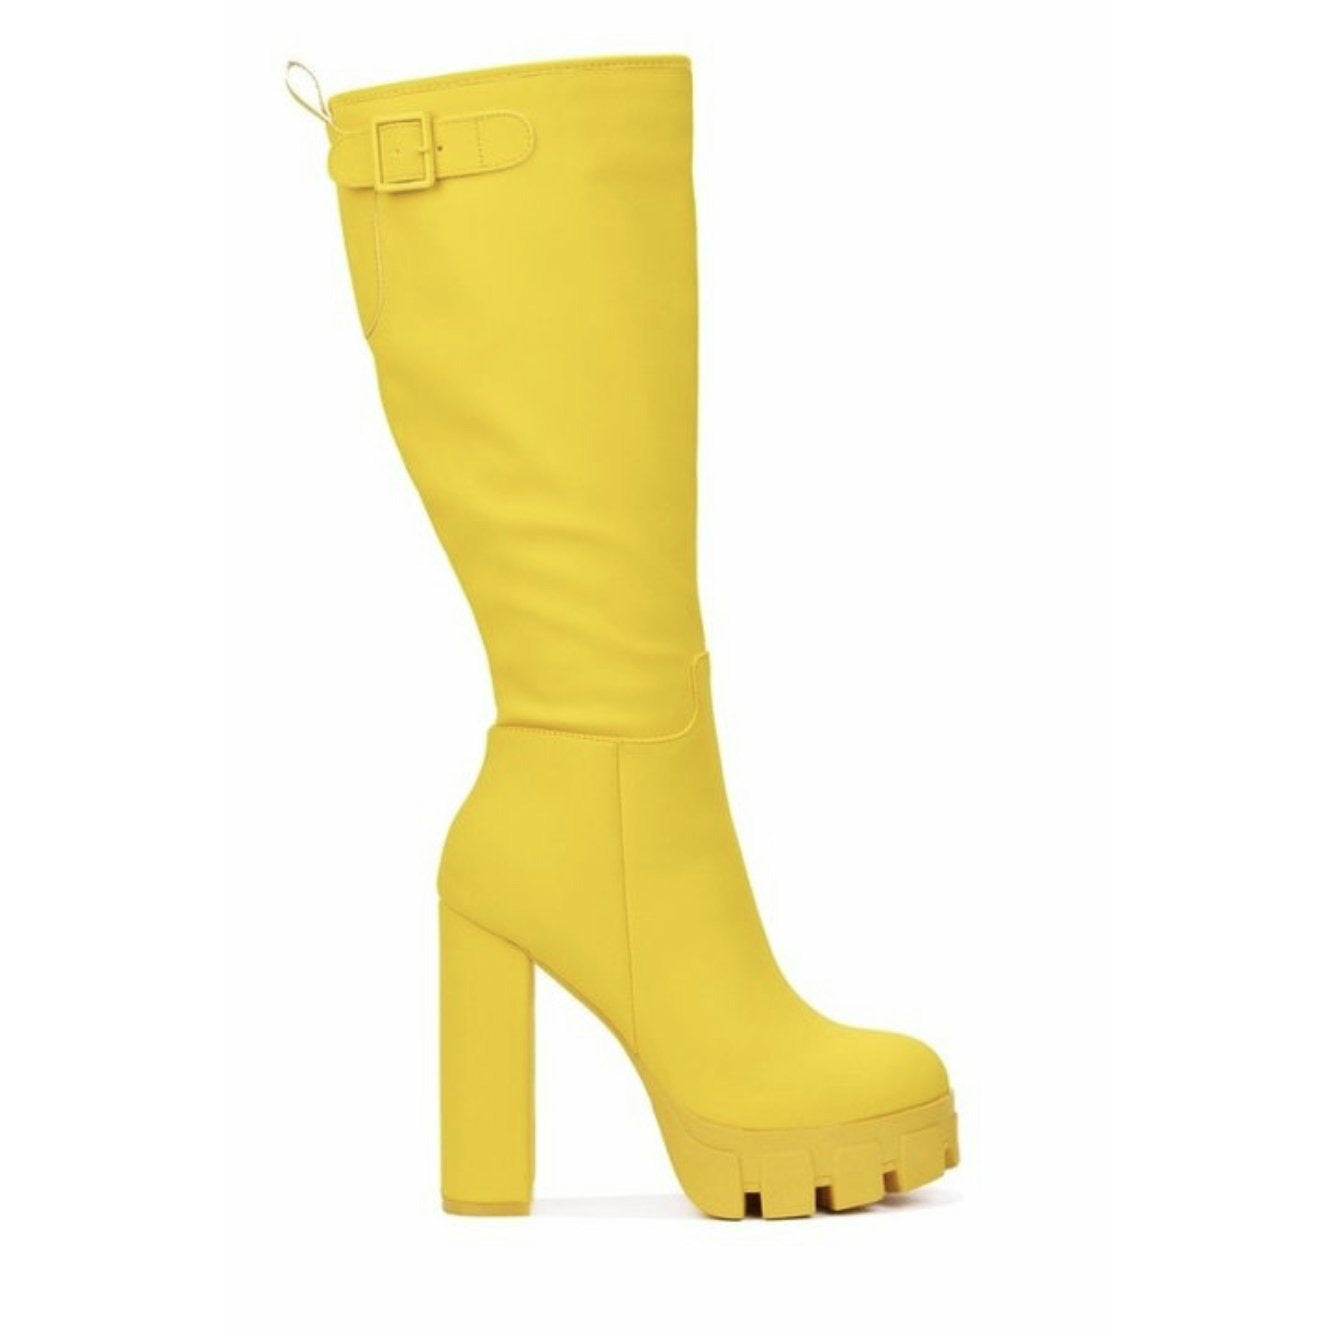 YELLOW KNEE HIGH BOOTS